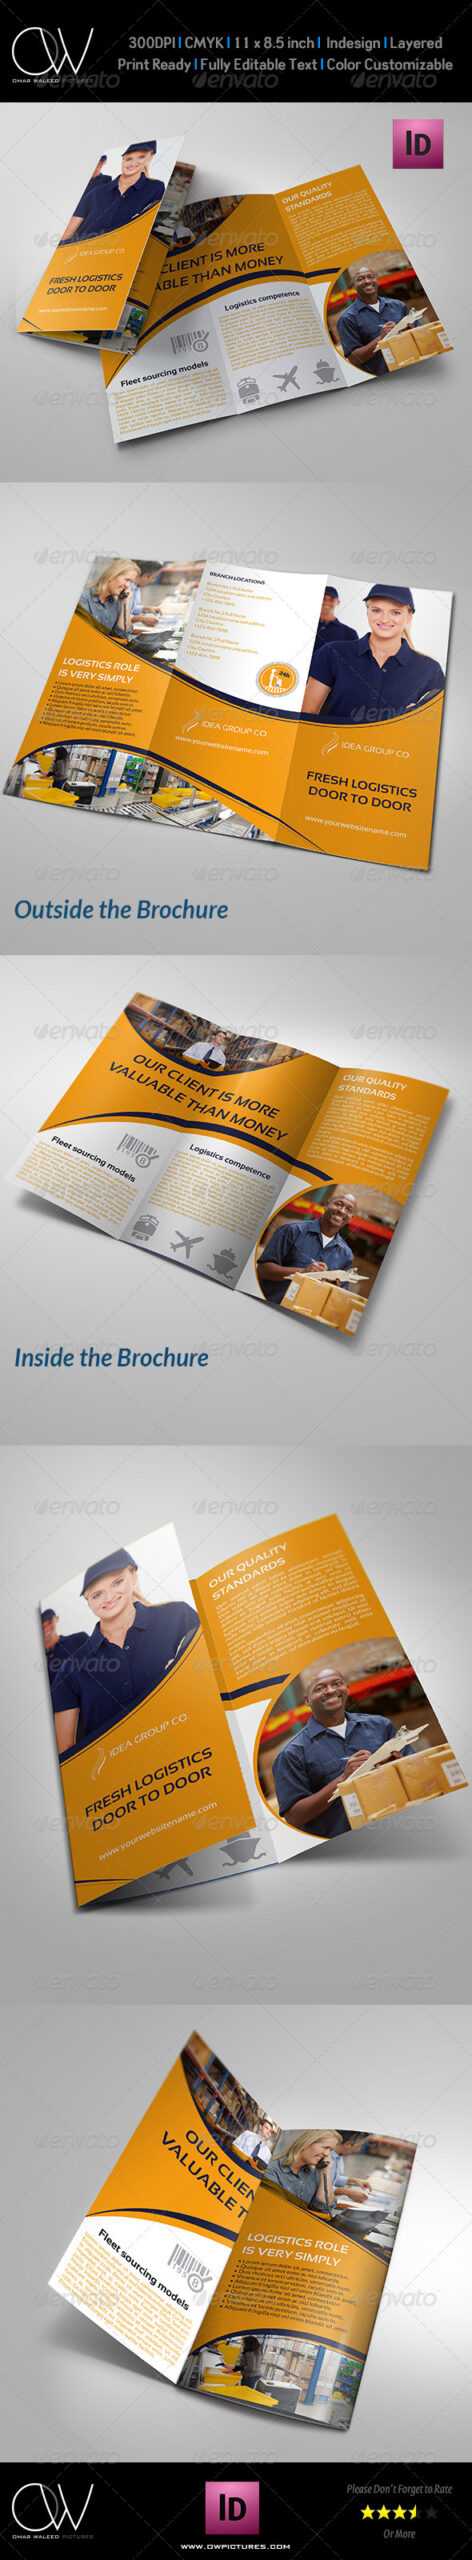 Fedex Flyer Graphics, Designs & Templates From Graphicriver Throughout Fedex Brochure Template